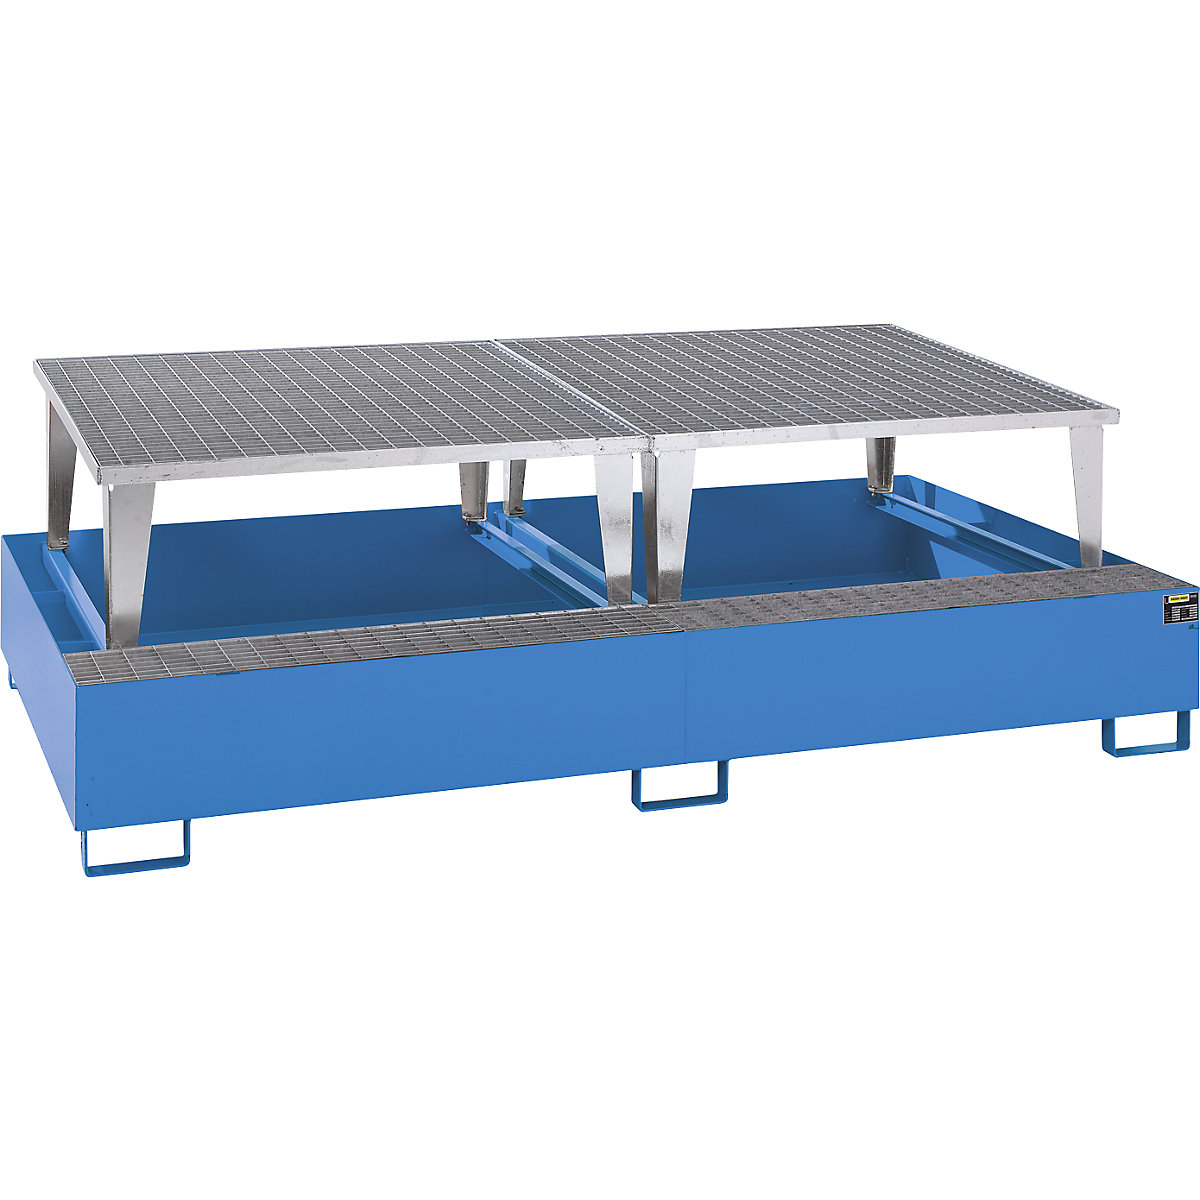 Steel sump tray for IBC/CTC tank containers – eurokraft pro, LxWxH 2650 x 1460 x 865 mm, with 2 filling attachments, sump capacity 1000 l, painted, blue RAL 5012-1